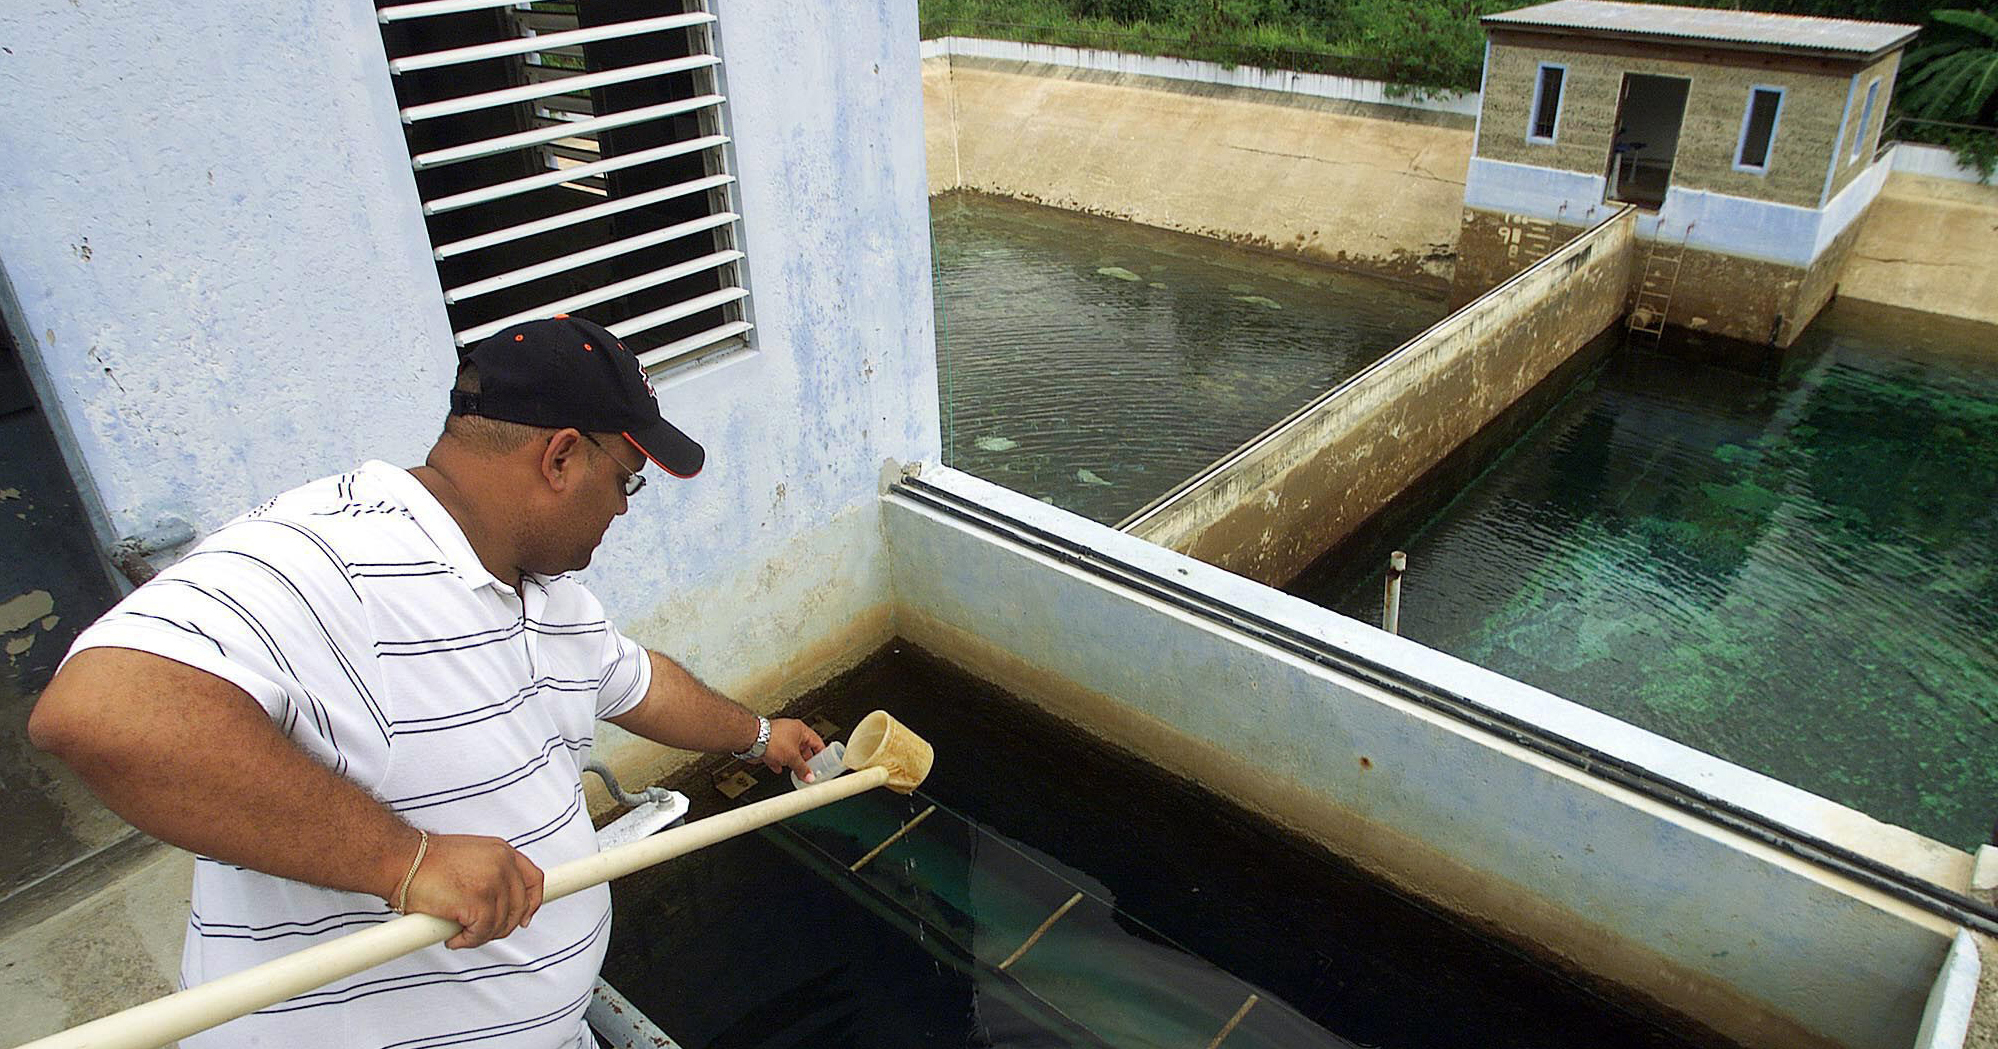 An aqueduct and sewer authority worker takes a sample of water from a water tank at a plant that supplies potable water to the town of San German, Puerto Rico.